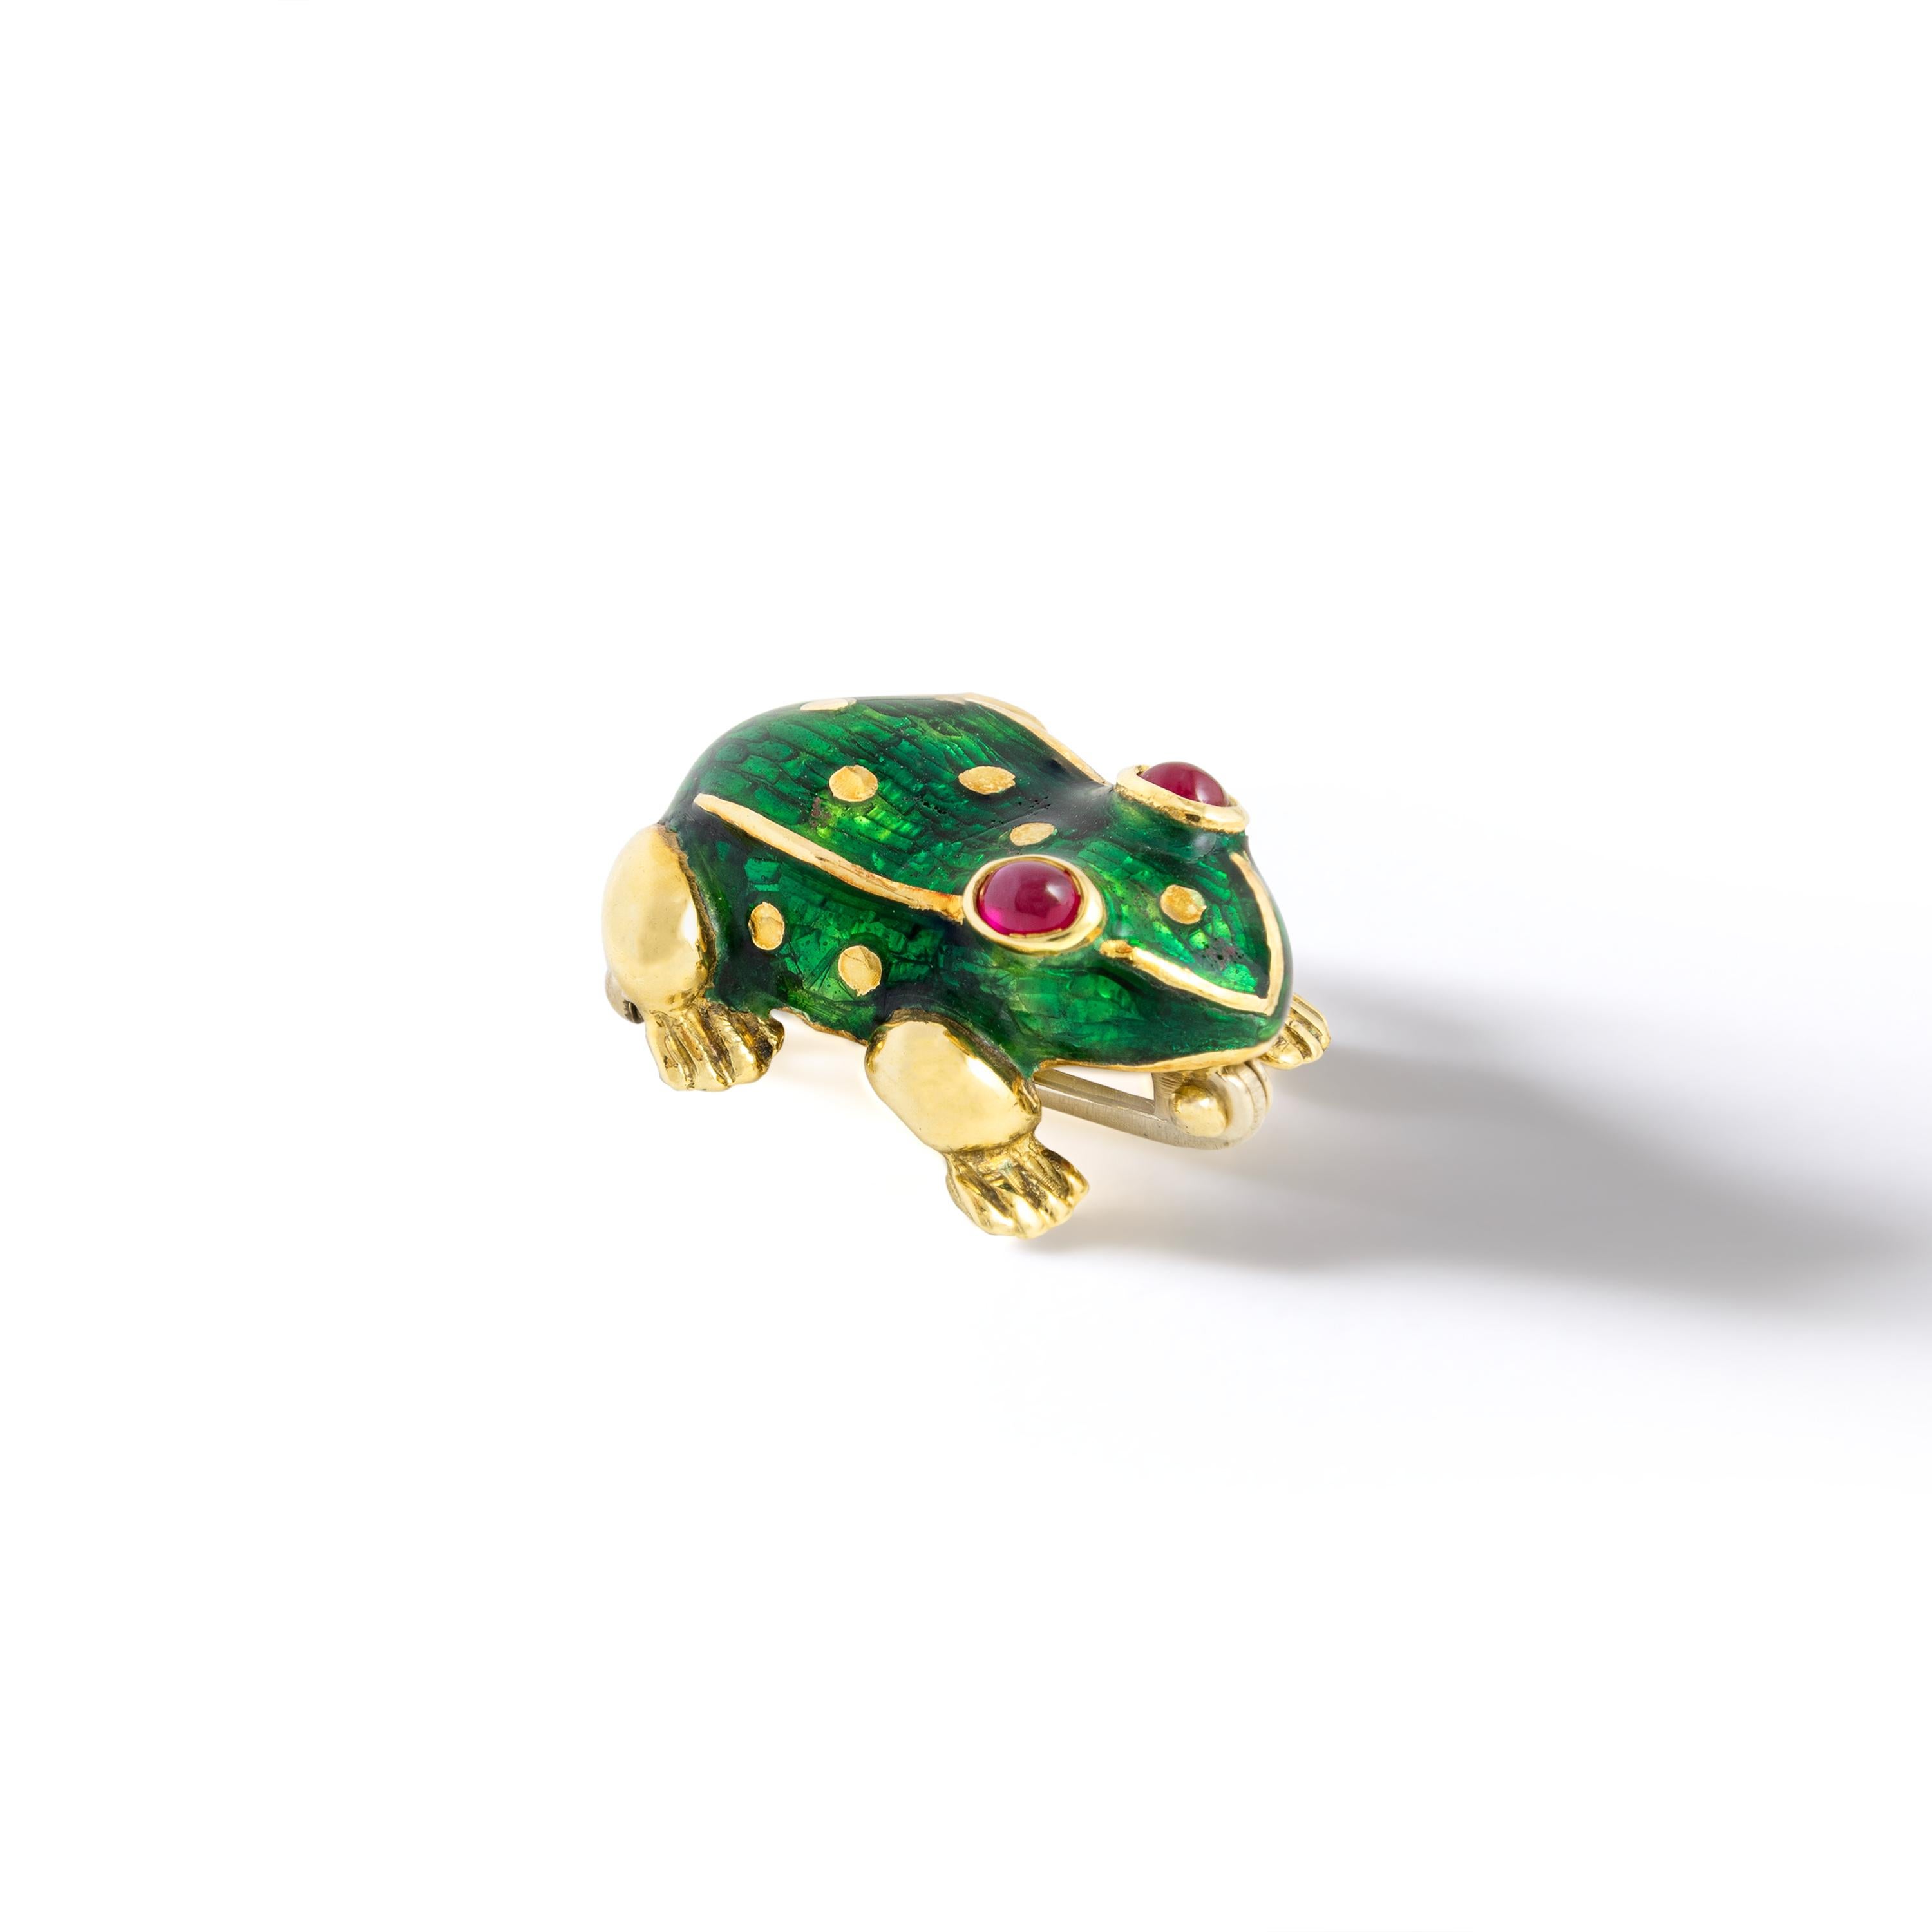 Frog yellow gold green enamel with ruby cabochon eyes Clip Brooch.
Chic and Elegant the perfect accessory on a jacket.

Total Length: 1.79 inch (2.00 centimeters).
Width at maximum: 1.71 inch (1.80 centimeters).
Total weight: 5.67 grams